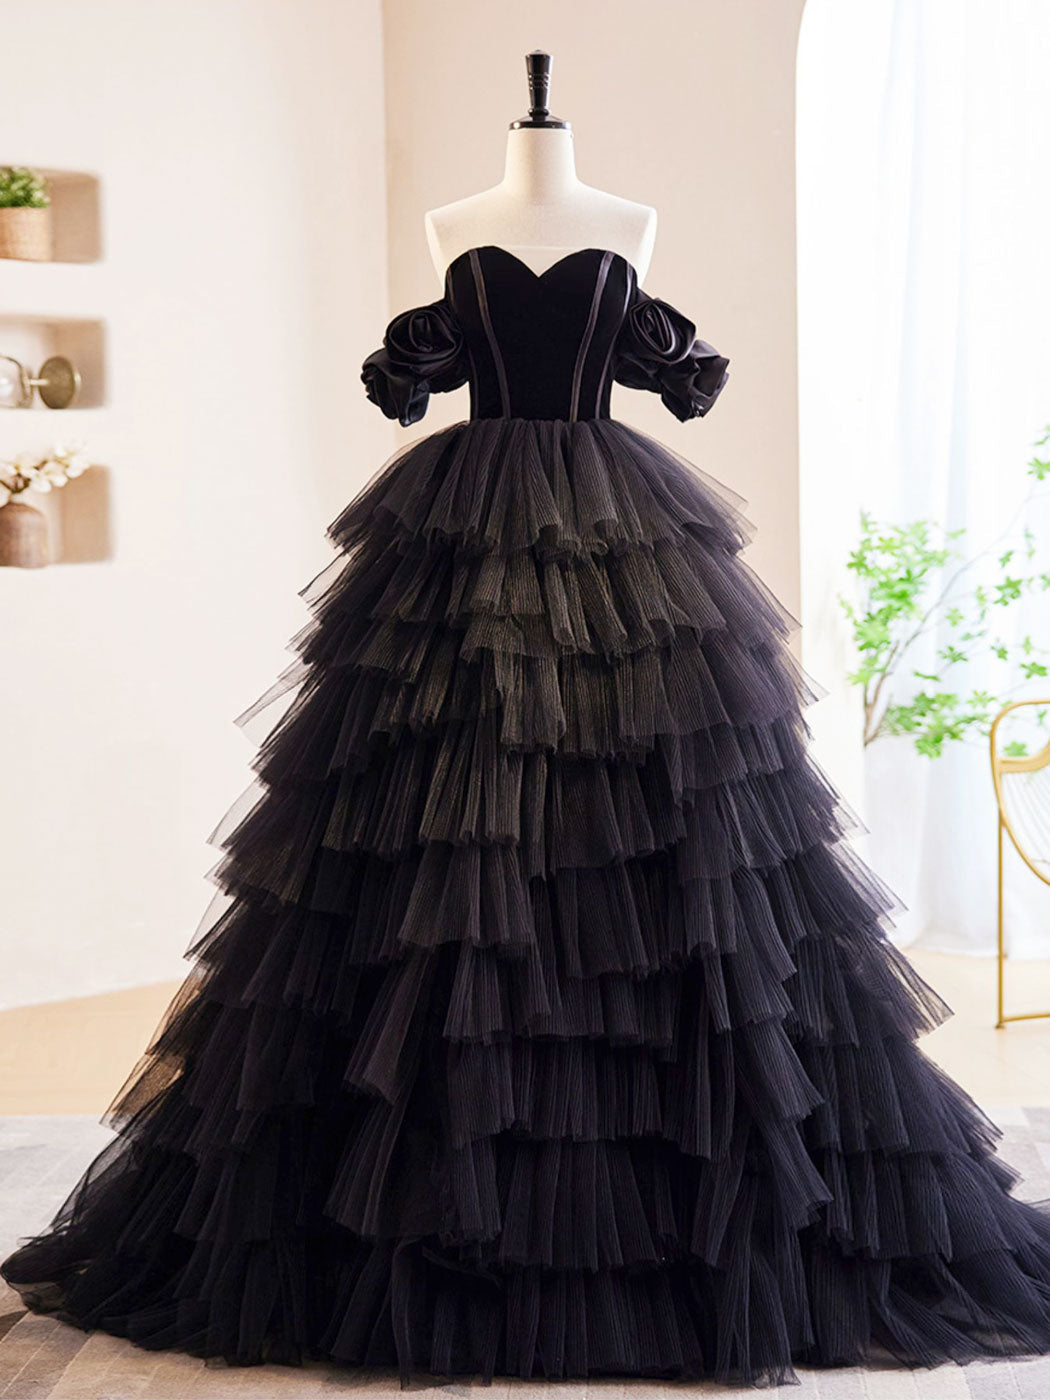 Black Off Shoulder Tulle Long Corset Prom Dress, Black Corset Formal Evening Dress outfit, Prom Dresses For Chubby Girls